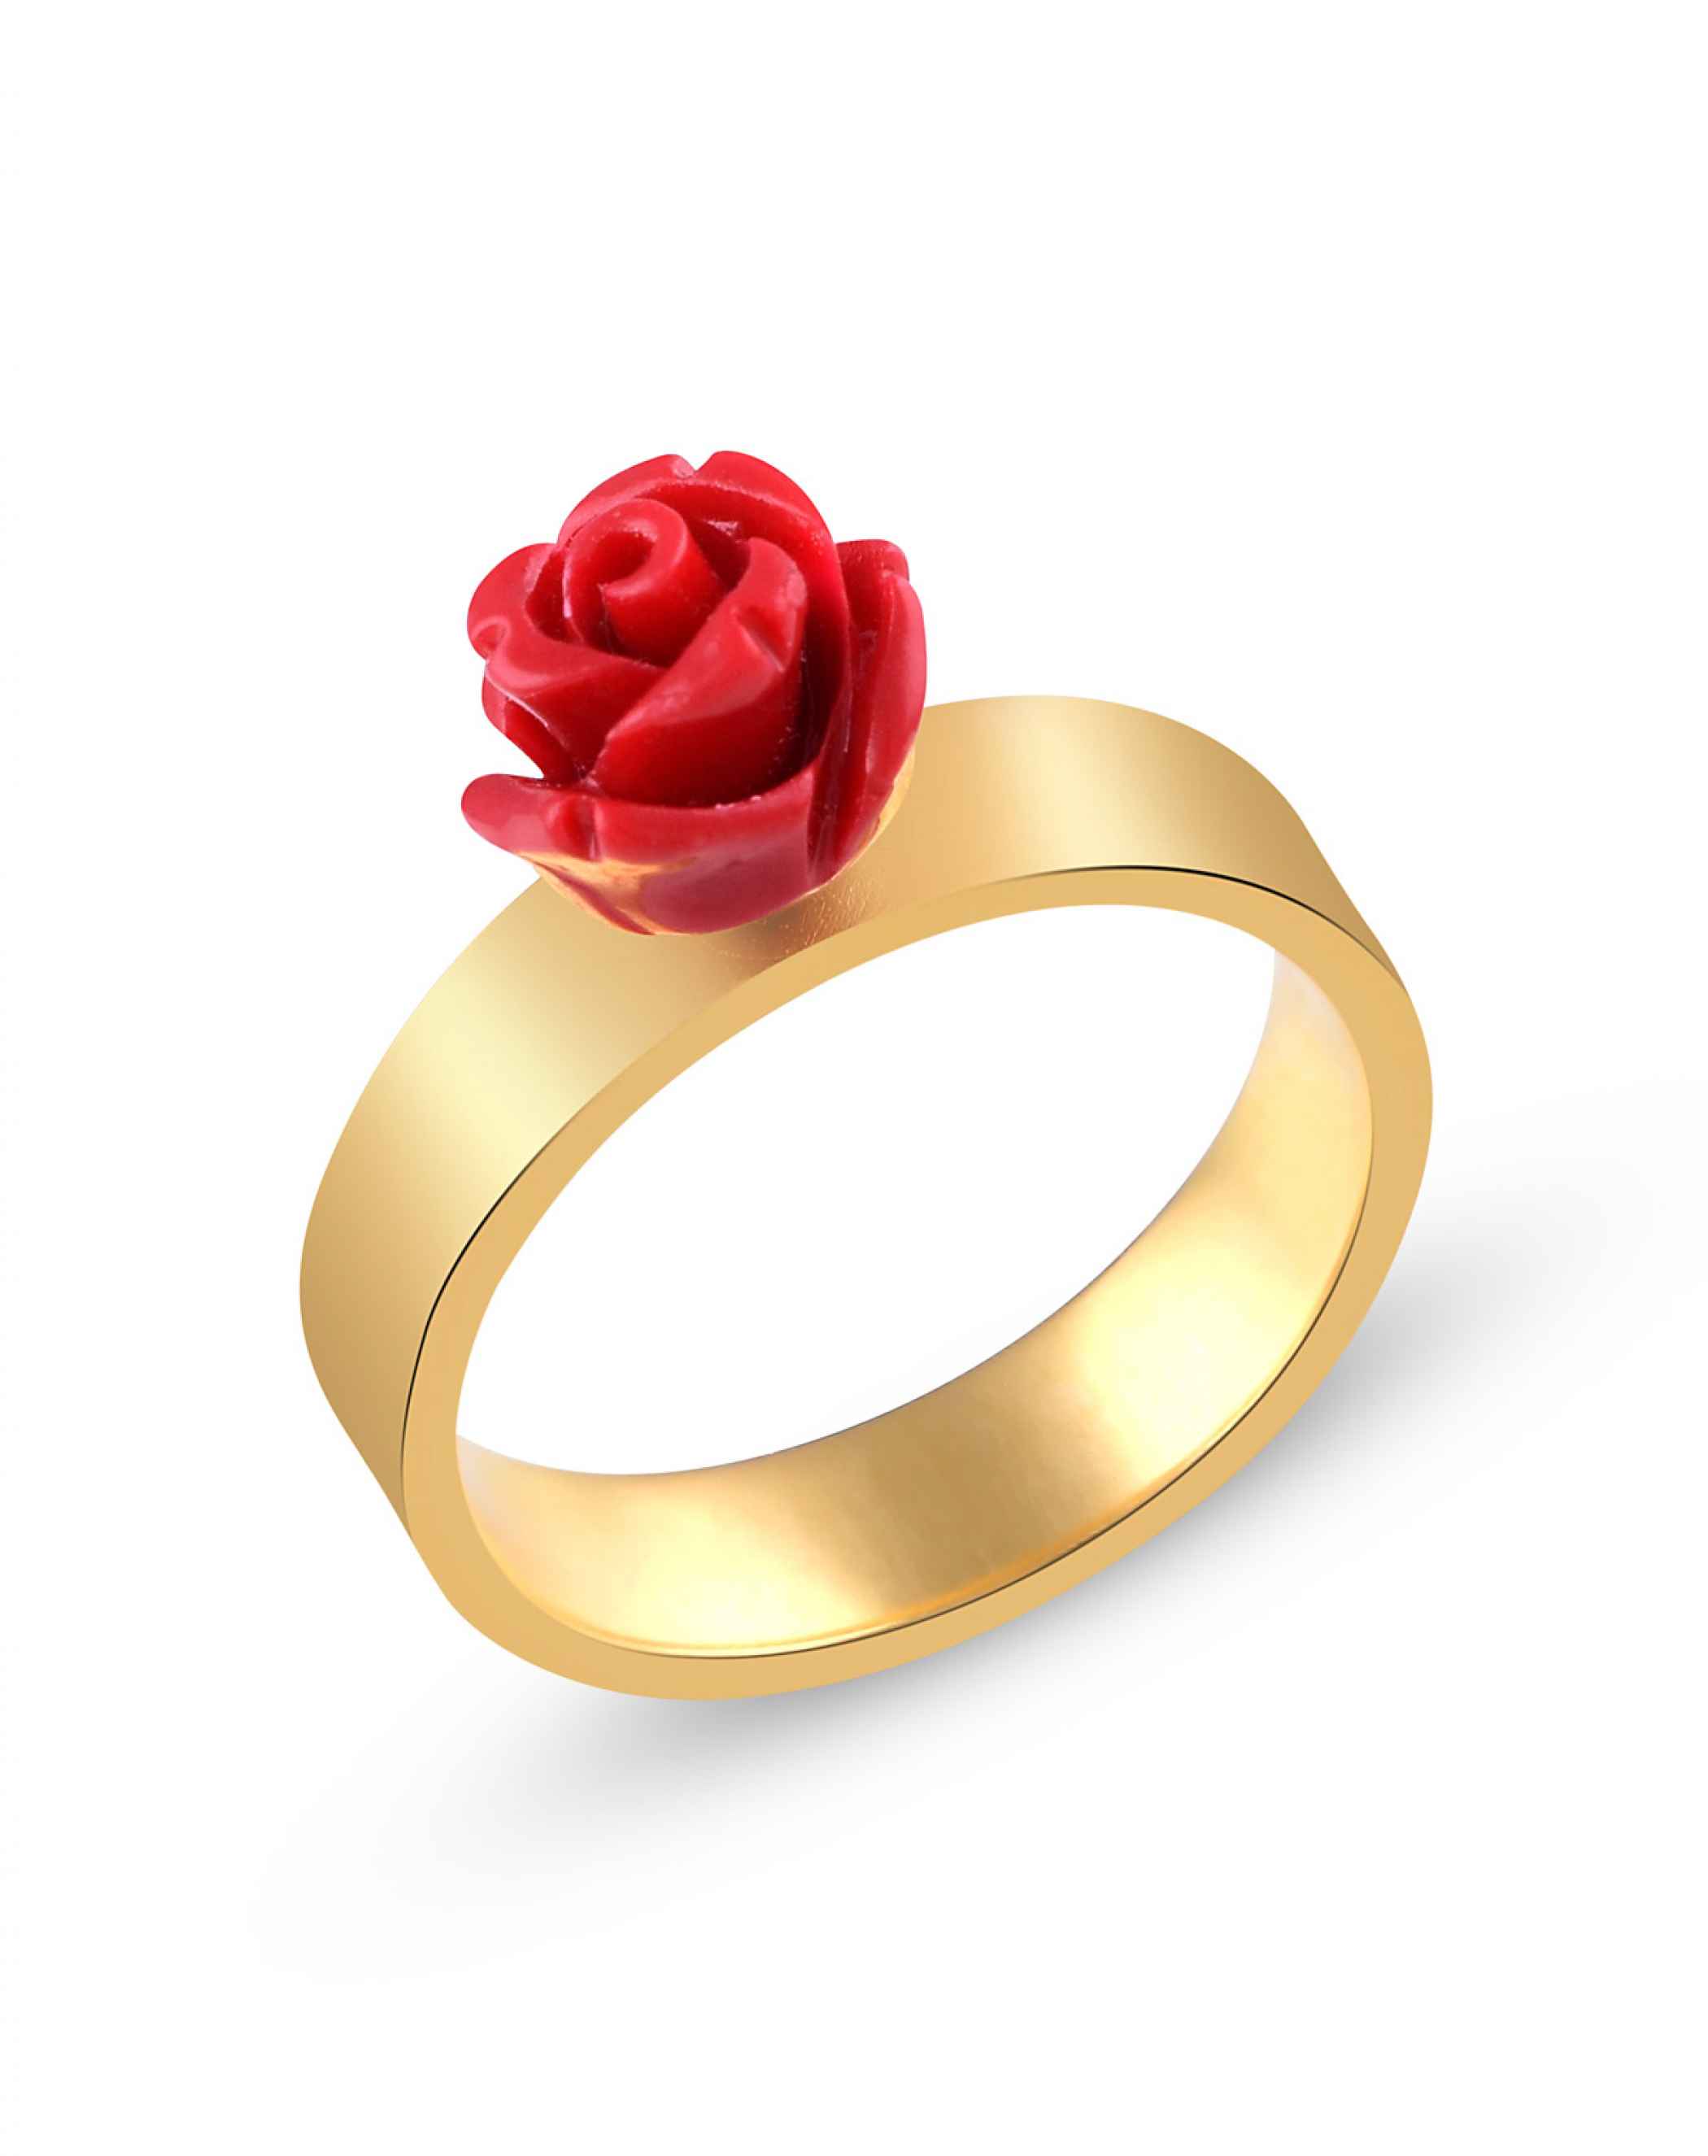 Two gold wedding rings with a red rose on the blue